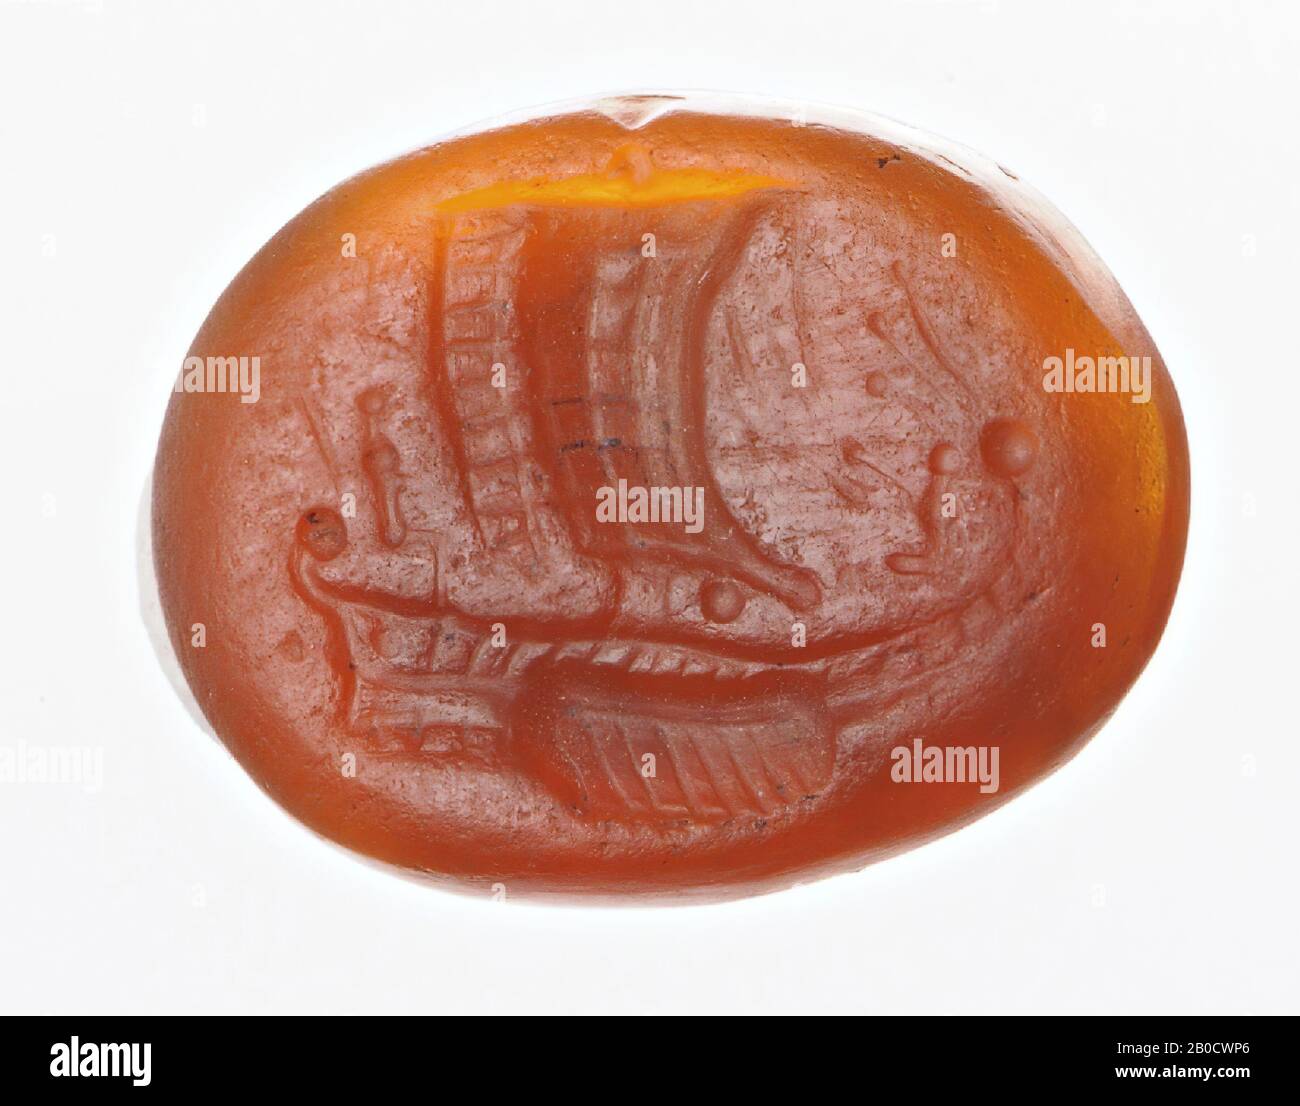 Vz: a large sailing ship with many oars and a small helmsman at the helm, a statue (?) With a high polos sitting on the bow., Gem, intaglio, ringstone, carnelian, Color: orange, Shape: oval, Machined: edge front rounded, Method: shallow modeling with flattish drill, detailing with thin rounded wheel grooves and several bouterolle pellets., 15 x 11 mm, D. 2 mm, end of 1st century BC. -25 Stock Photo